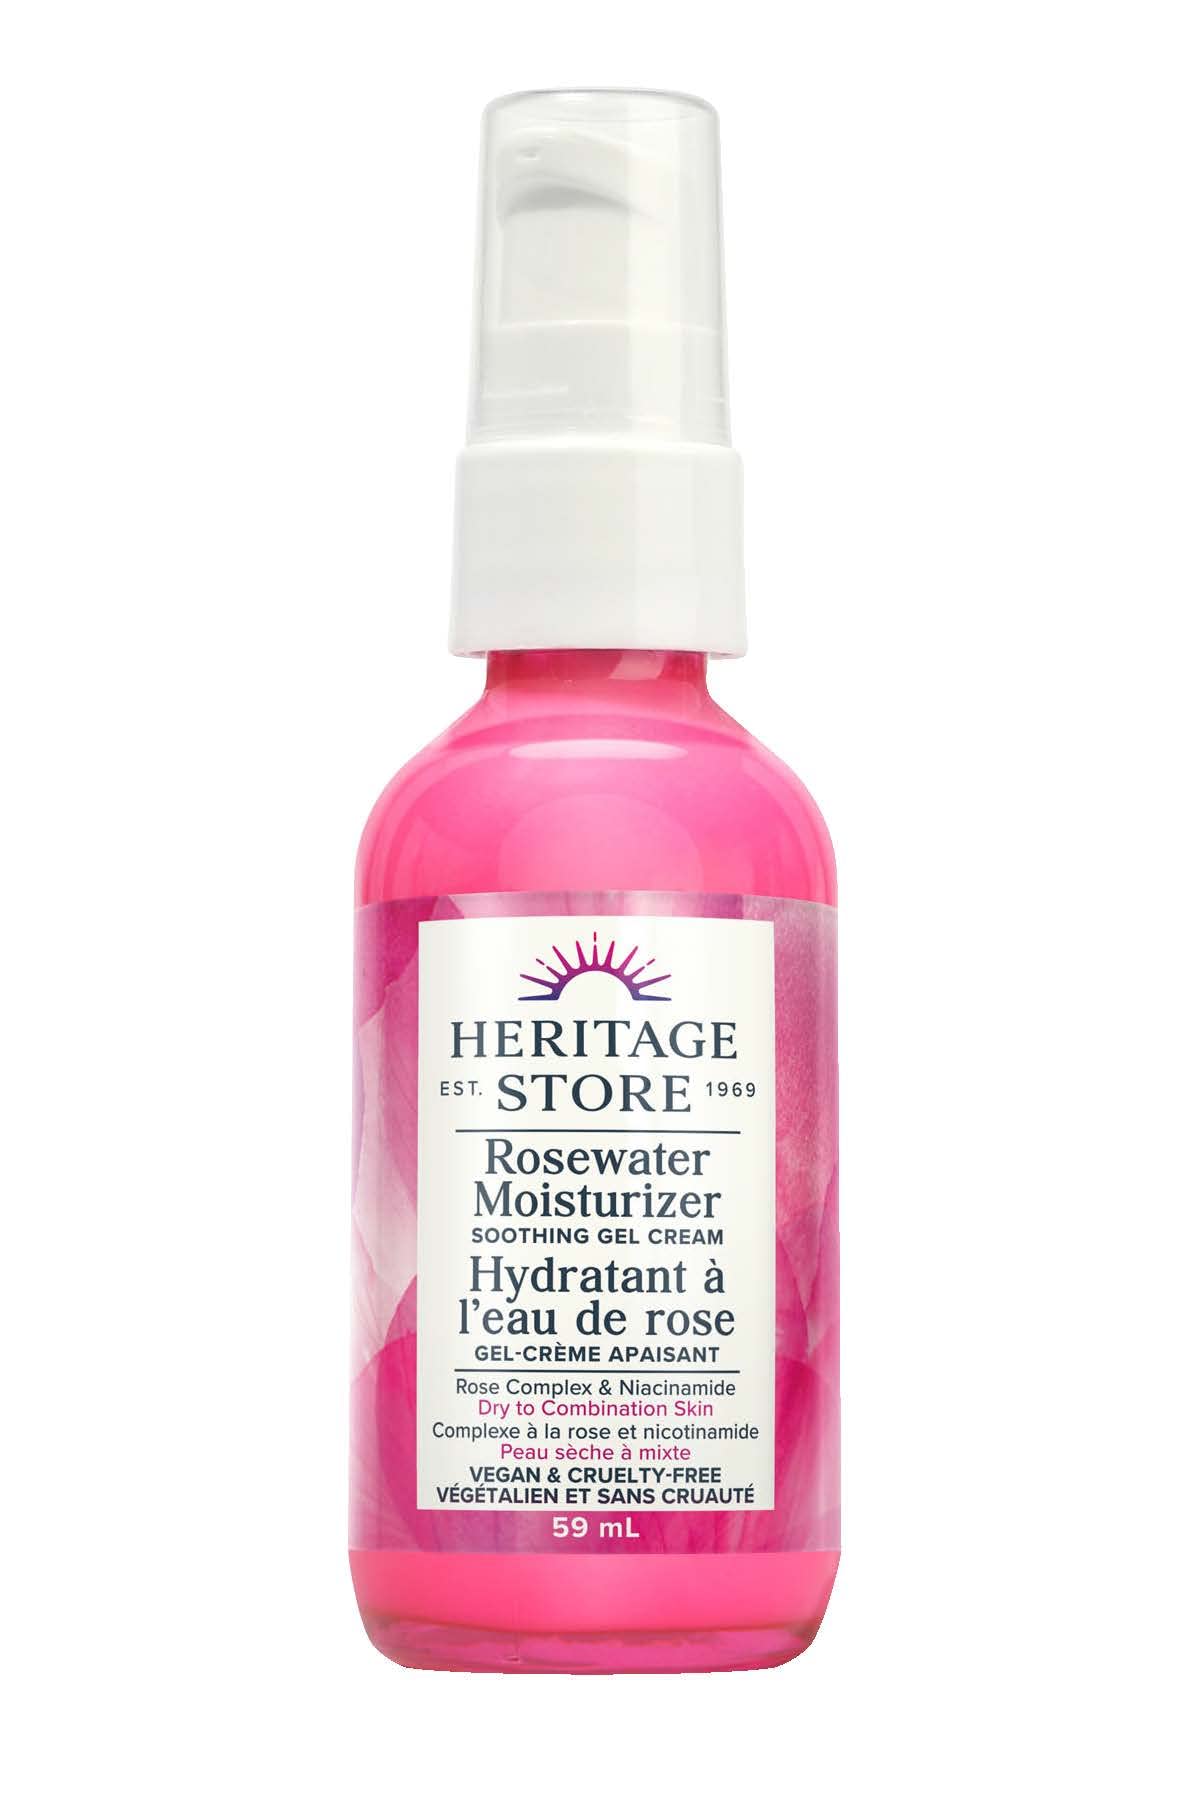 Heritage Store - Rosewater Moisturizer | Soothing Gel Cream | Rose Complex and Niacinamide | Vegan & Cruelty Free | Dry to Combination Skin Type | 59ml, Clear